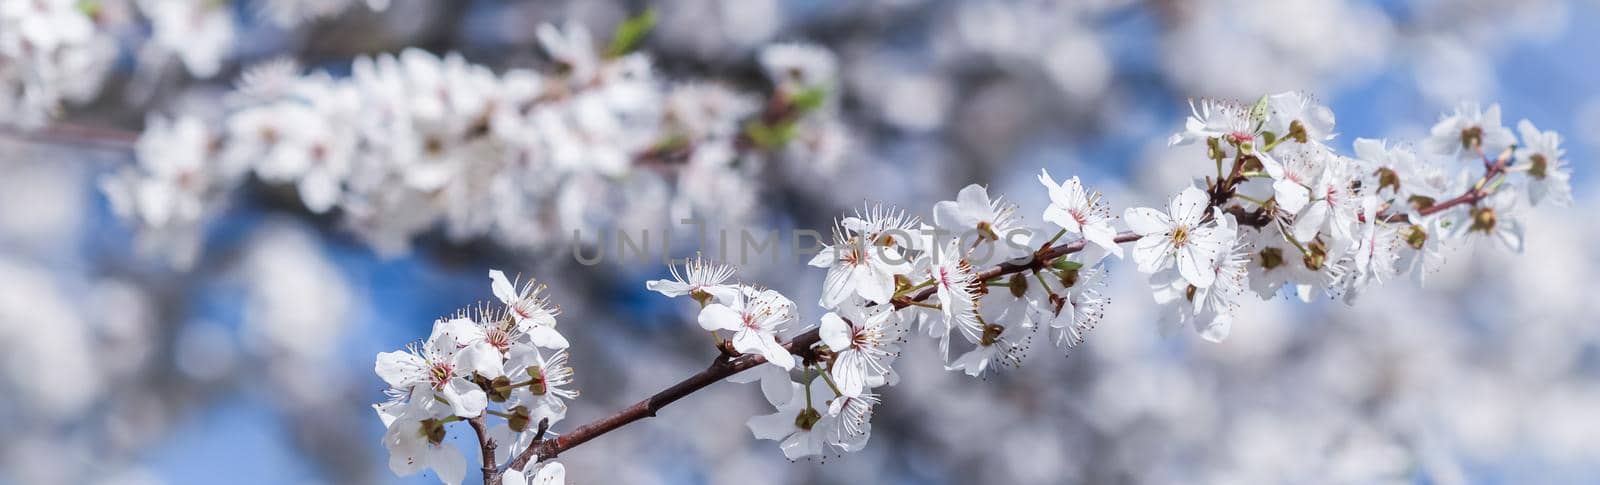 Cherry blossoms in spring. Beautiful white flowers against blue sky by Olayola